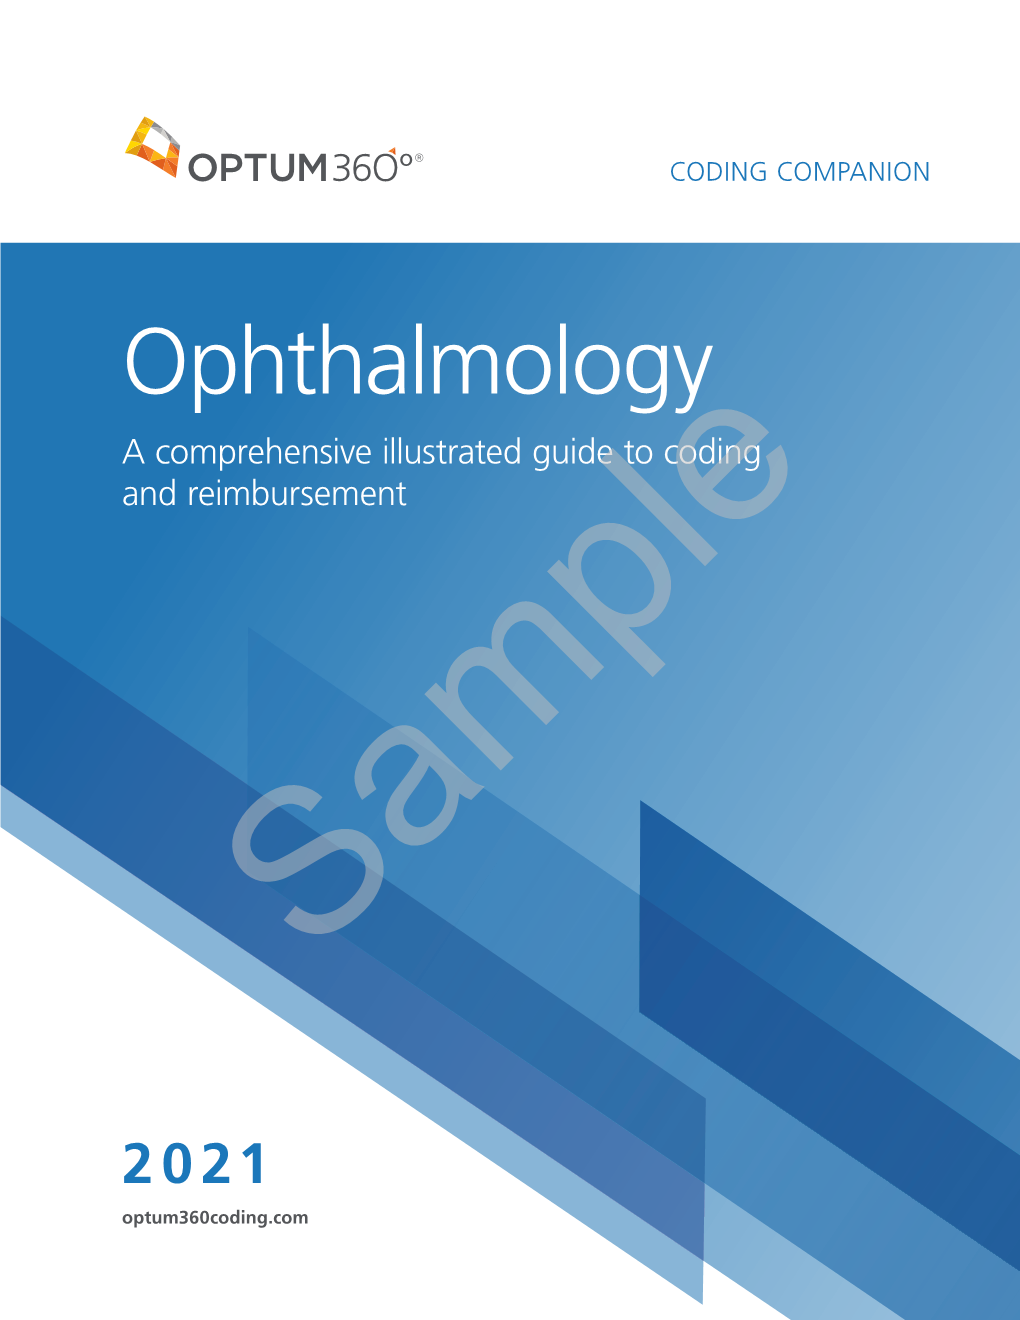 Ophthalmology a Comprehensive Illustrated Guide to Coding and Reimbursement